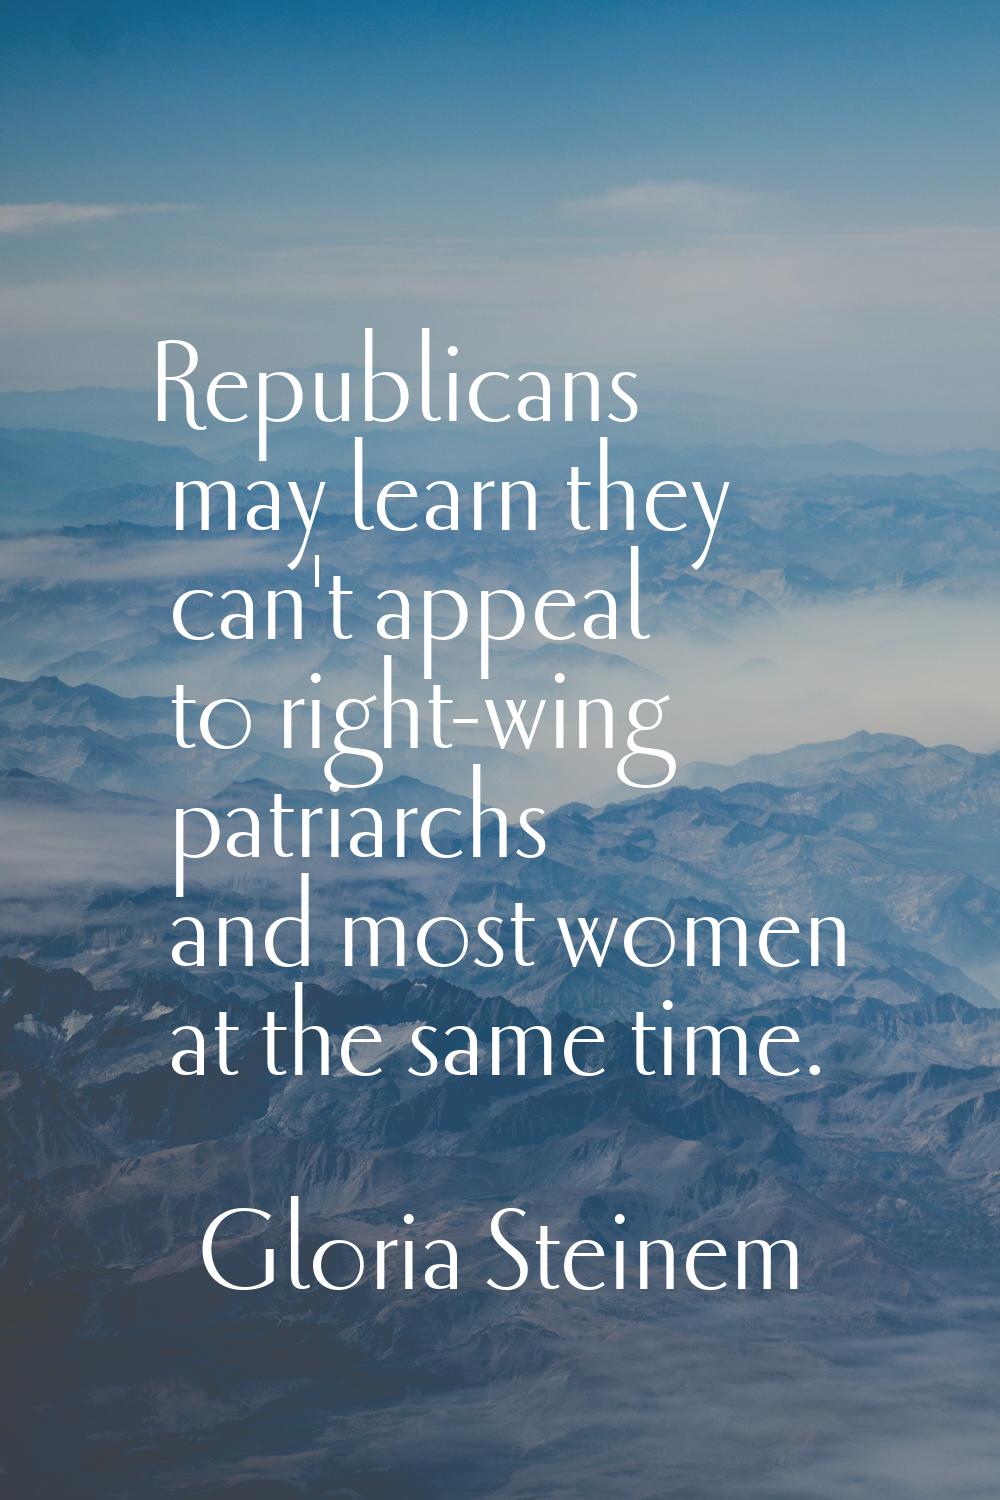 Republicans may learn they can't appeal to right-wing patriarchs and most women at the same time.